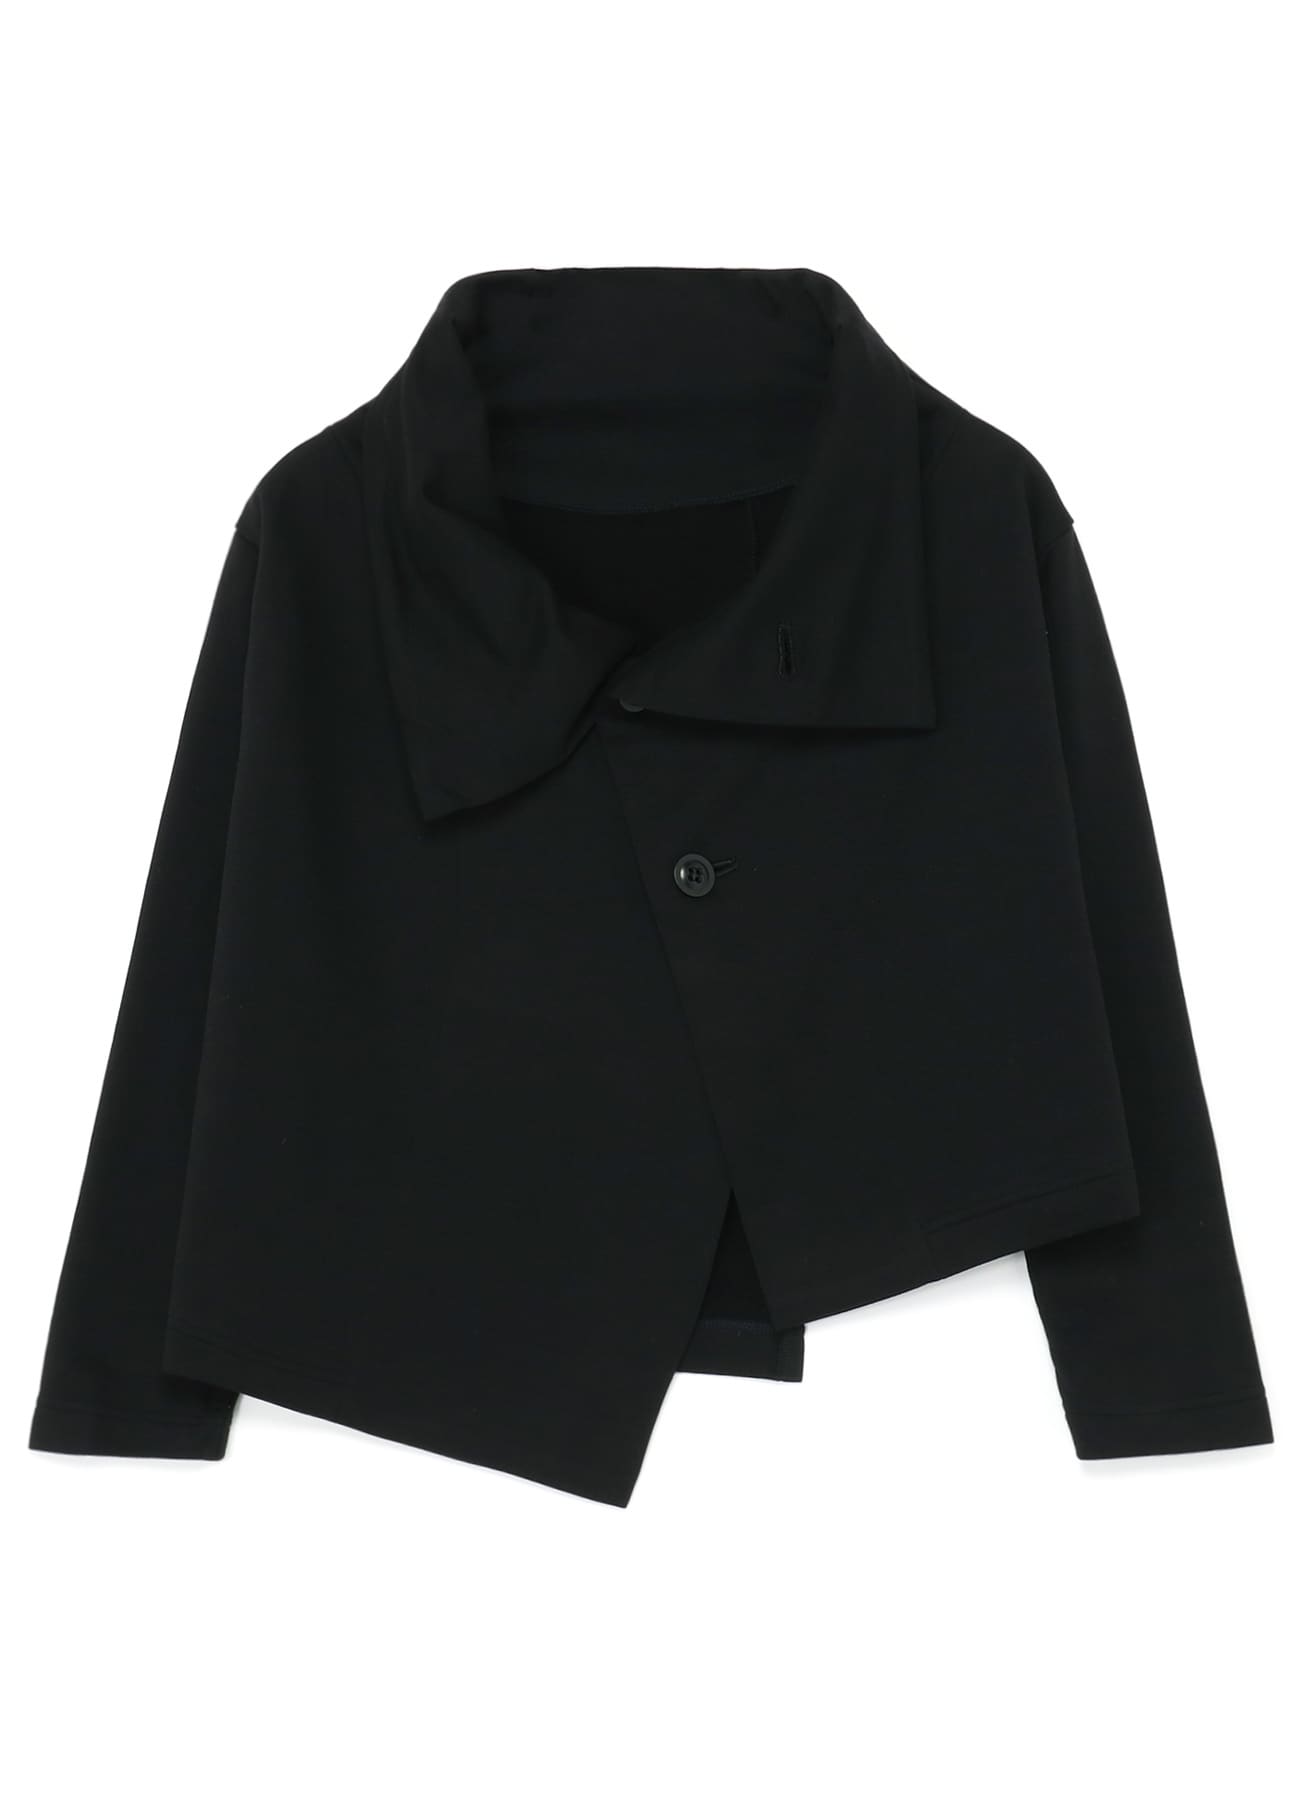 SMOOTH COTTON FRENCH TERRY ASYMMETRIC CROPPED JACKET